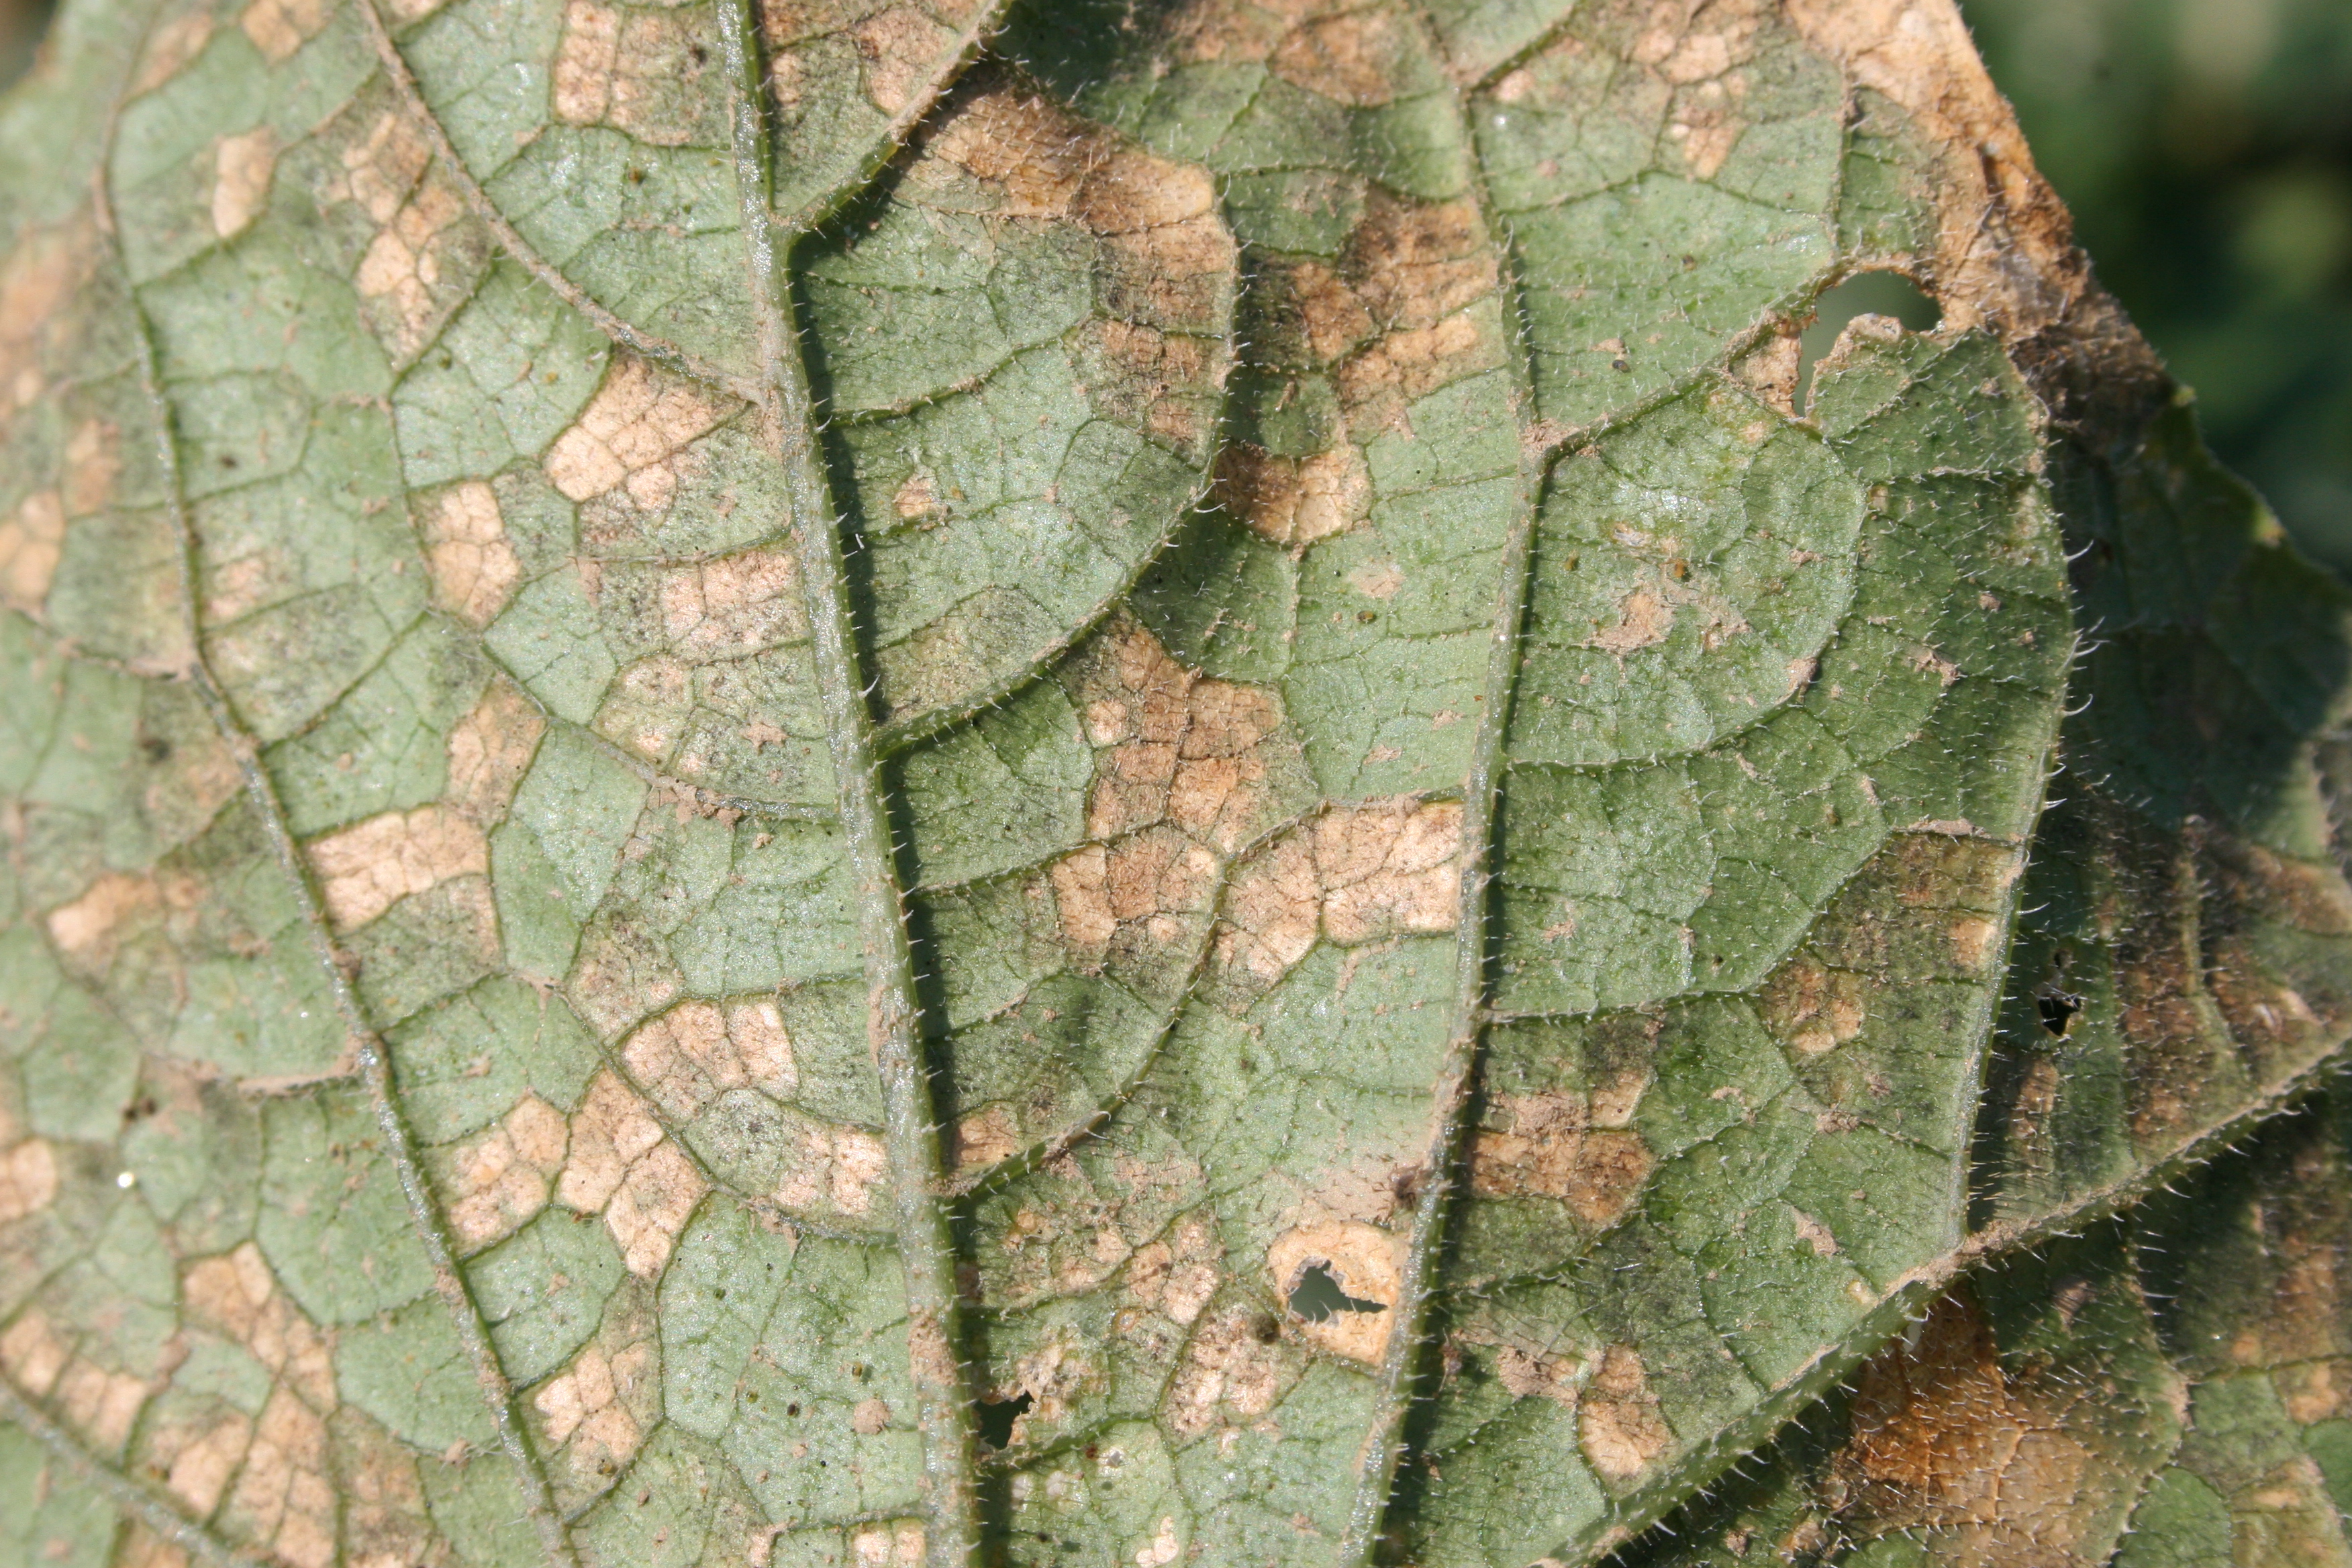 Downy mildew on lower side of cucumber plant foliage.